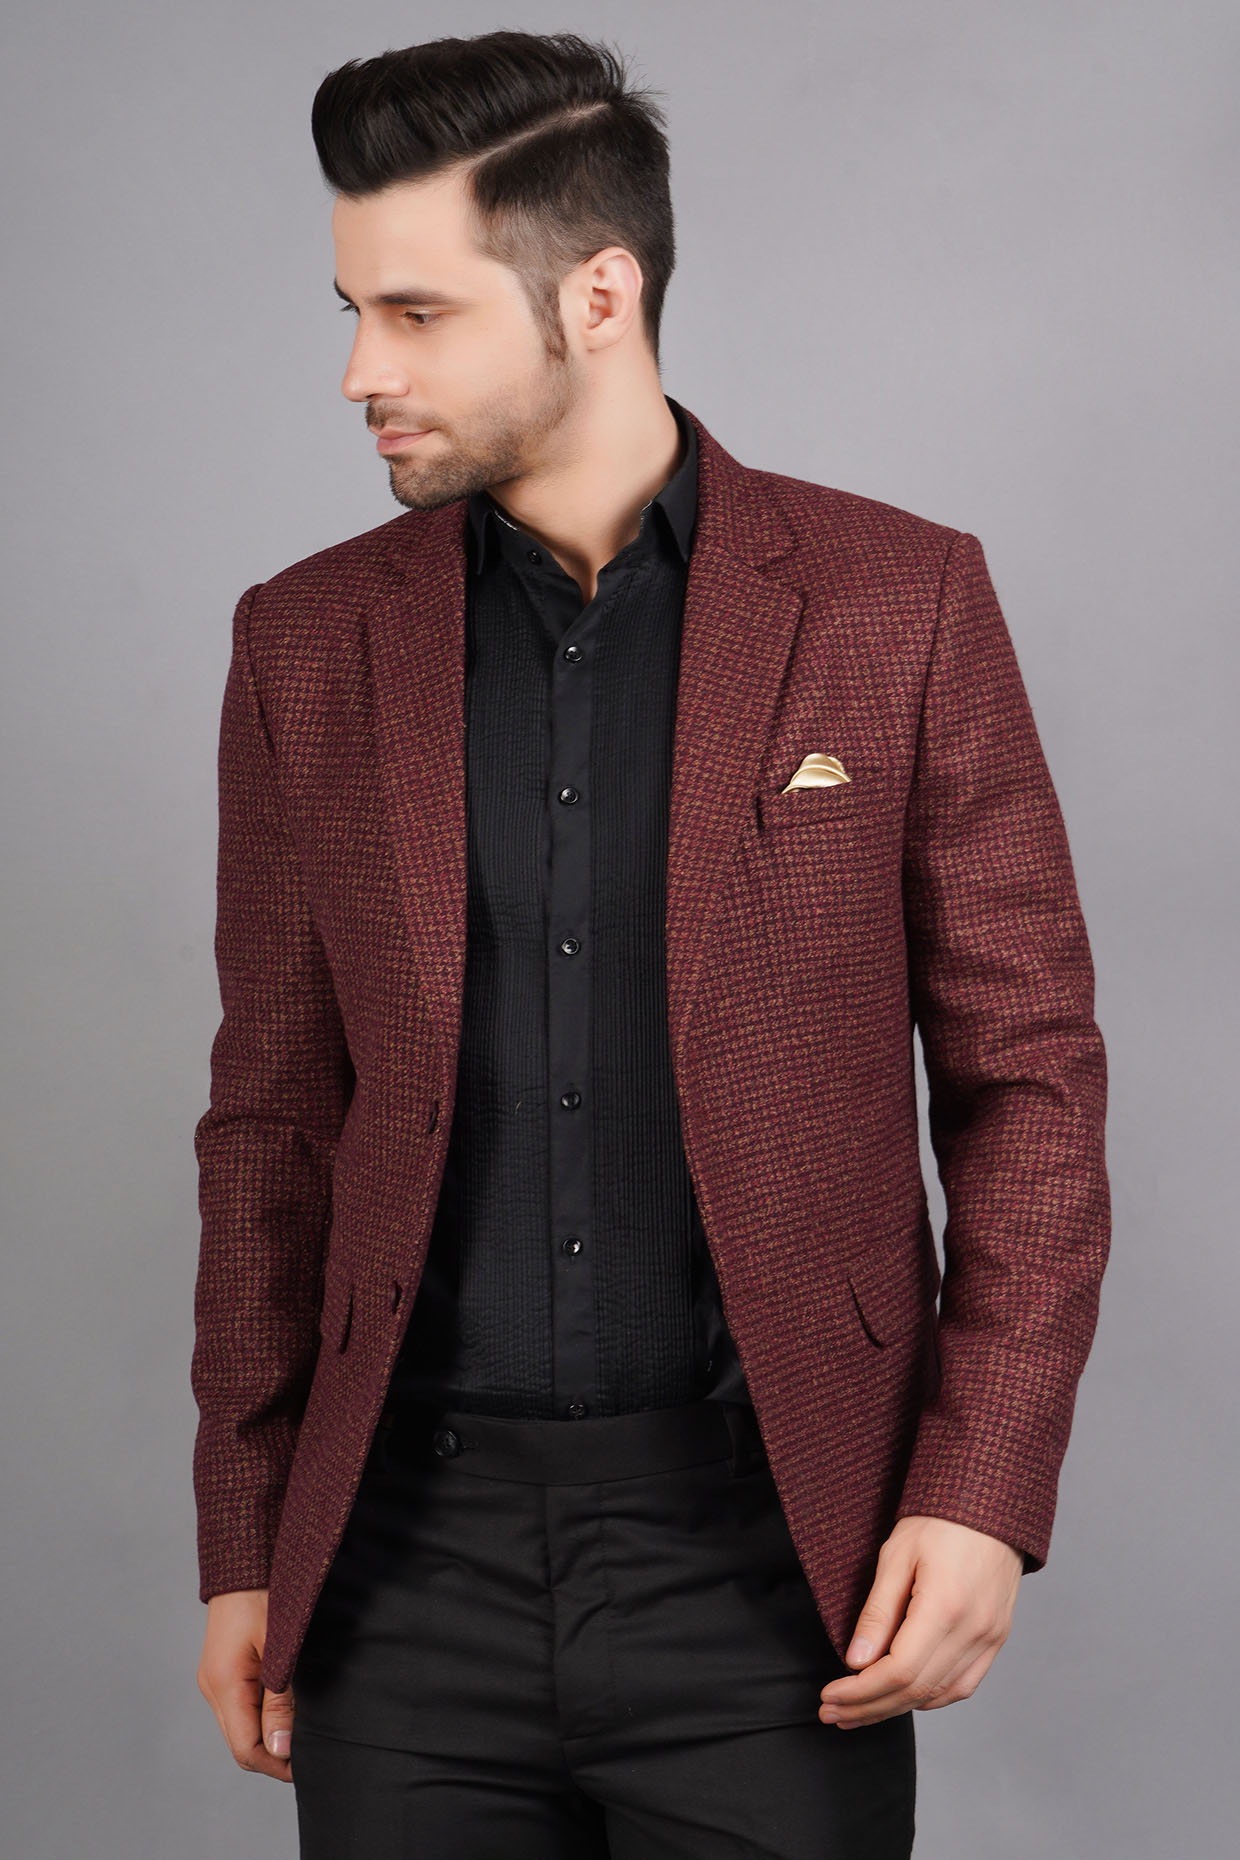 Burgundy Blazer Outfit Ideas For Men || Men Blazer Outfit || by Look  Stylish - YouTube